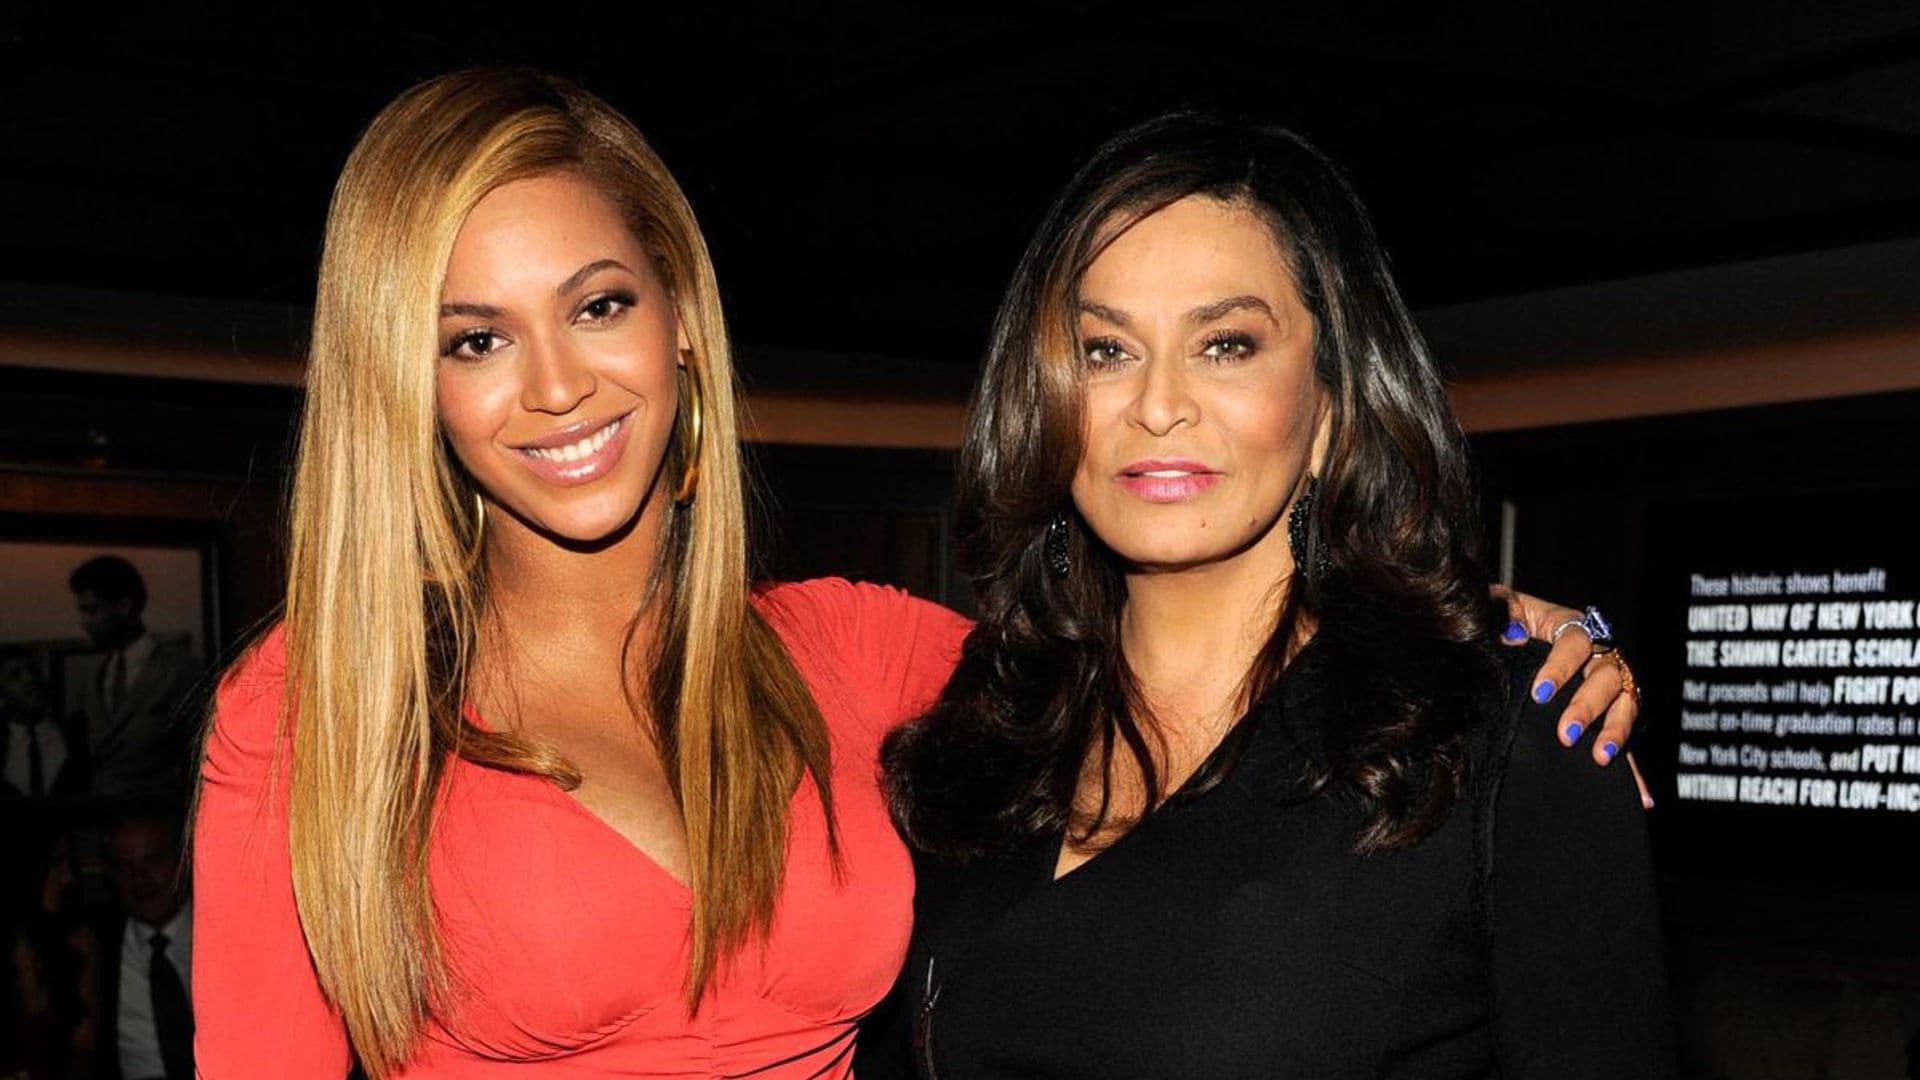 Beyoncé’s upcoming haircare line might be inspired by her mom, Tina Lawson